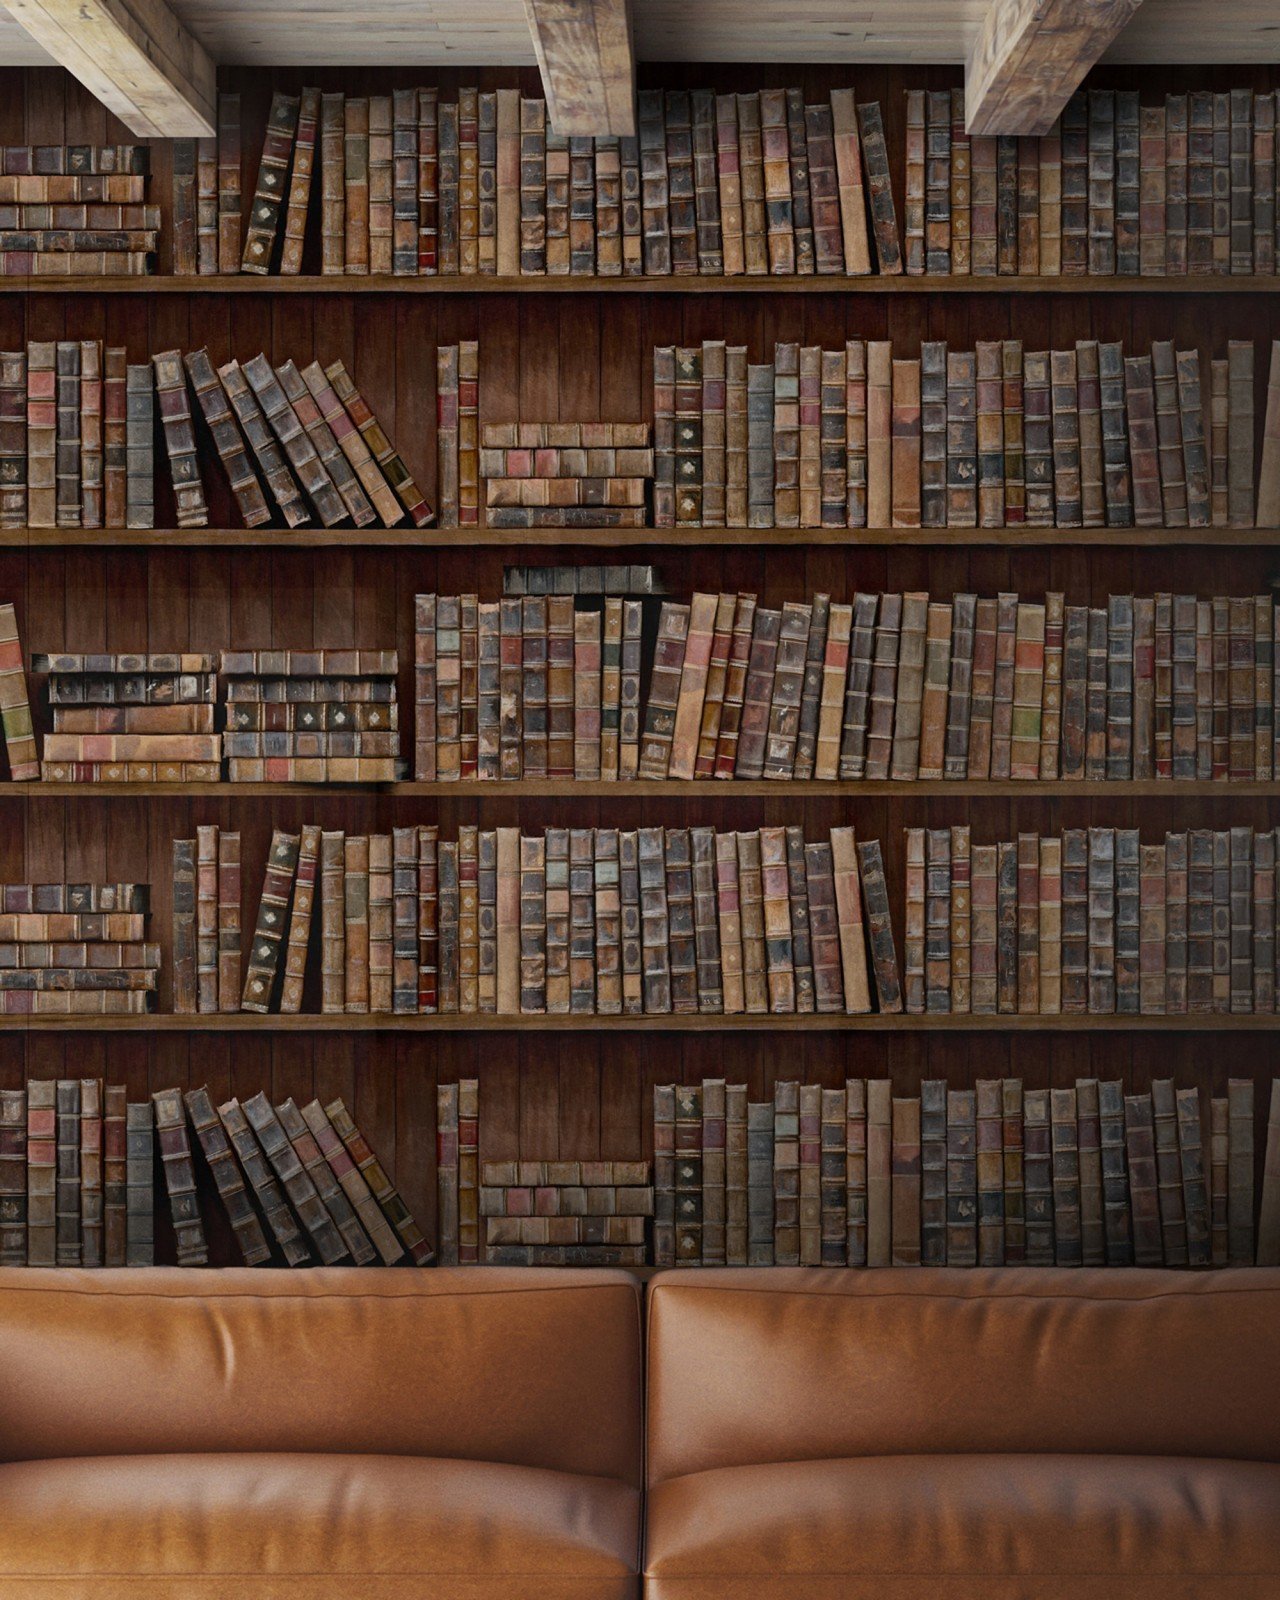 Let's celebrate #worldbookday with the Book Shelves from @mindtgap. #books #bookworm #wallpaper